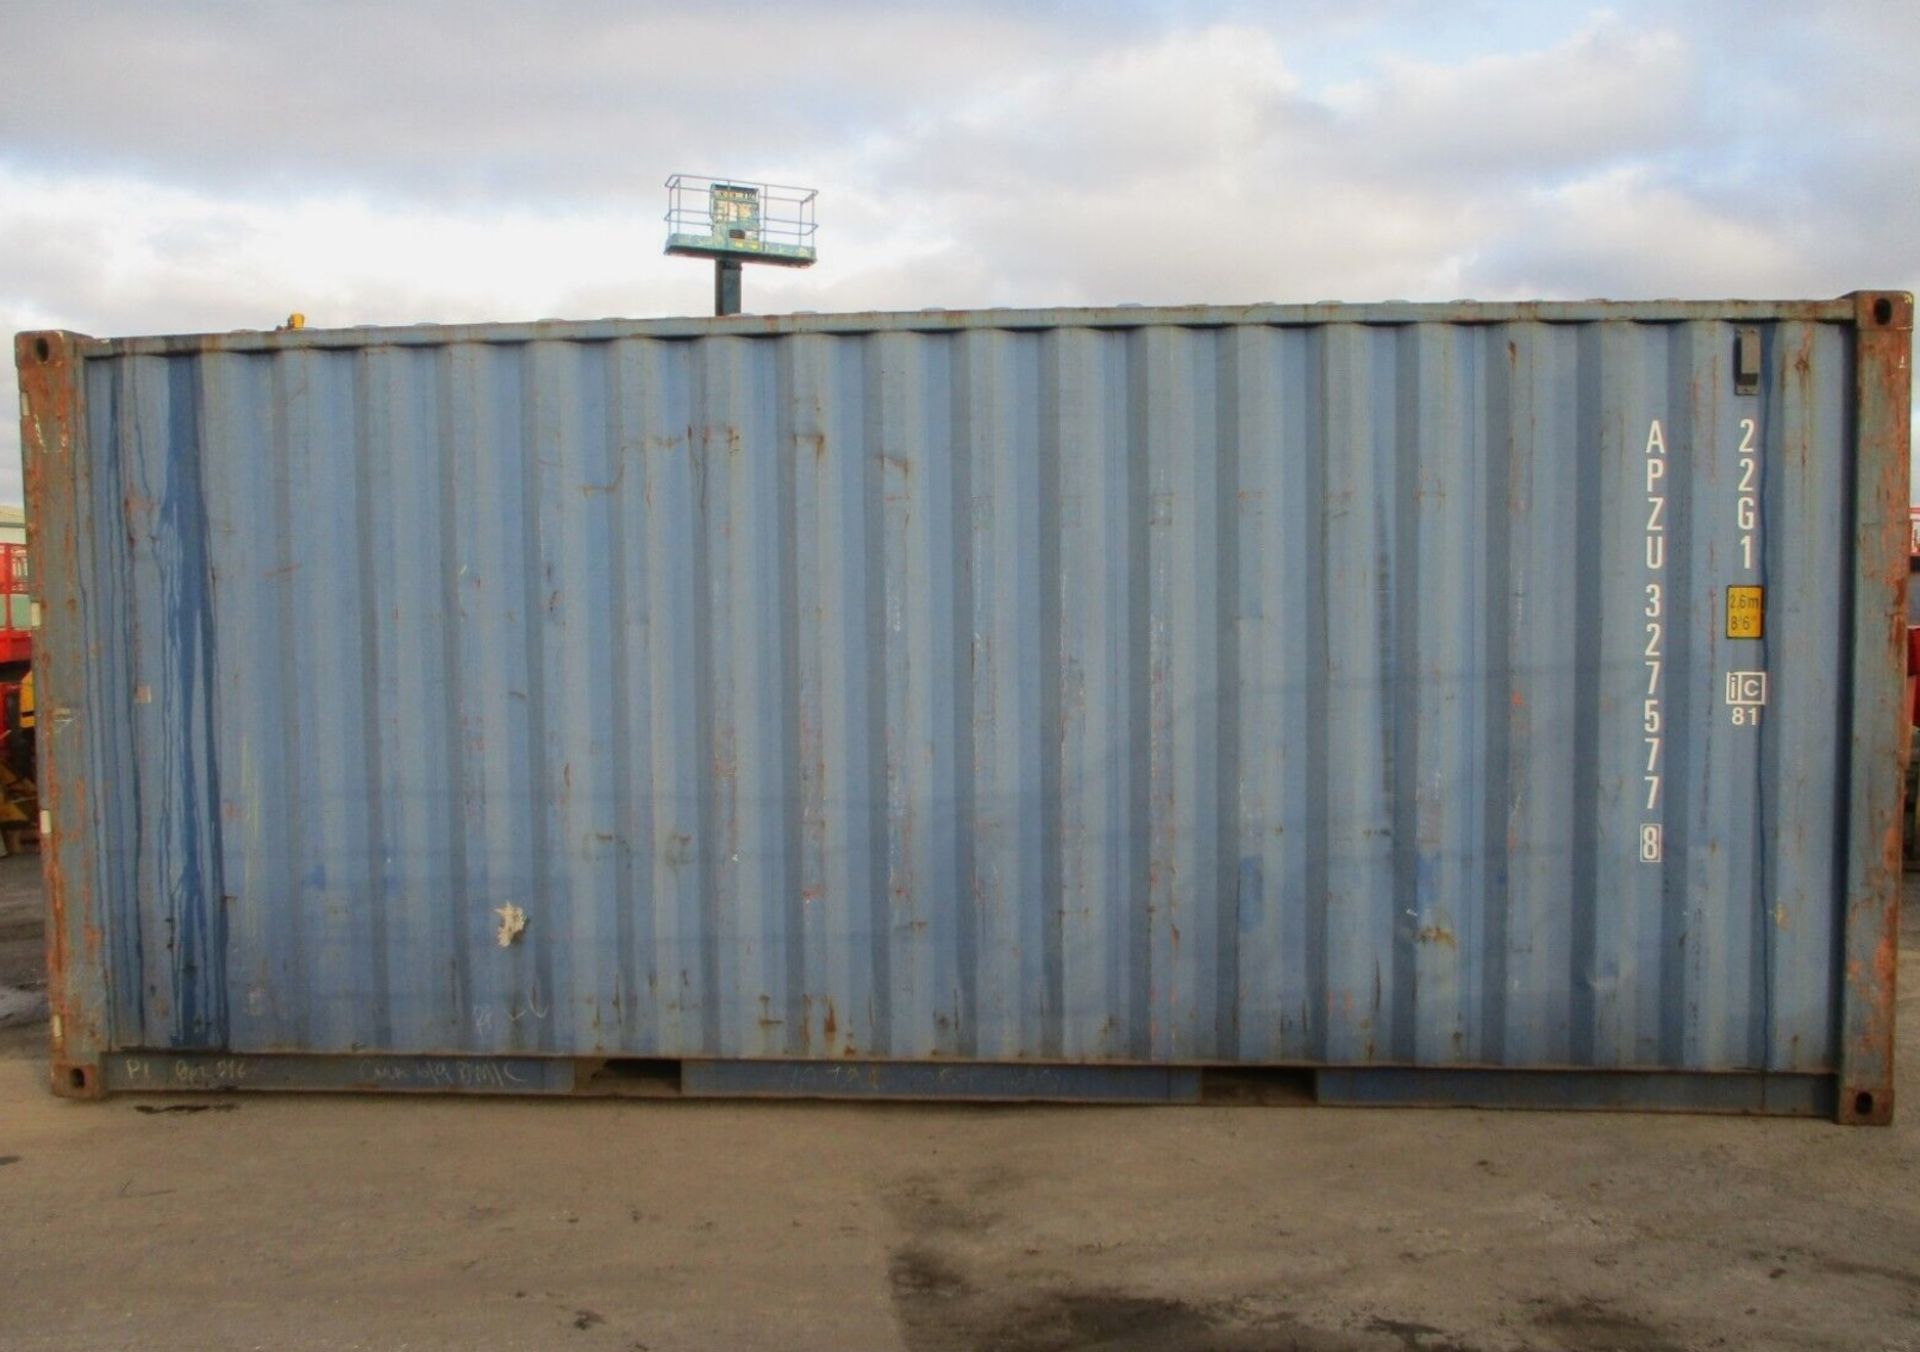 20 FEET LONG X 8 FEET WIDE SHIPPING CONTAINER: VERSATILE STORAGE SOLUTION - Image 5 of 10